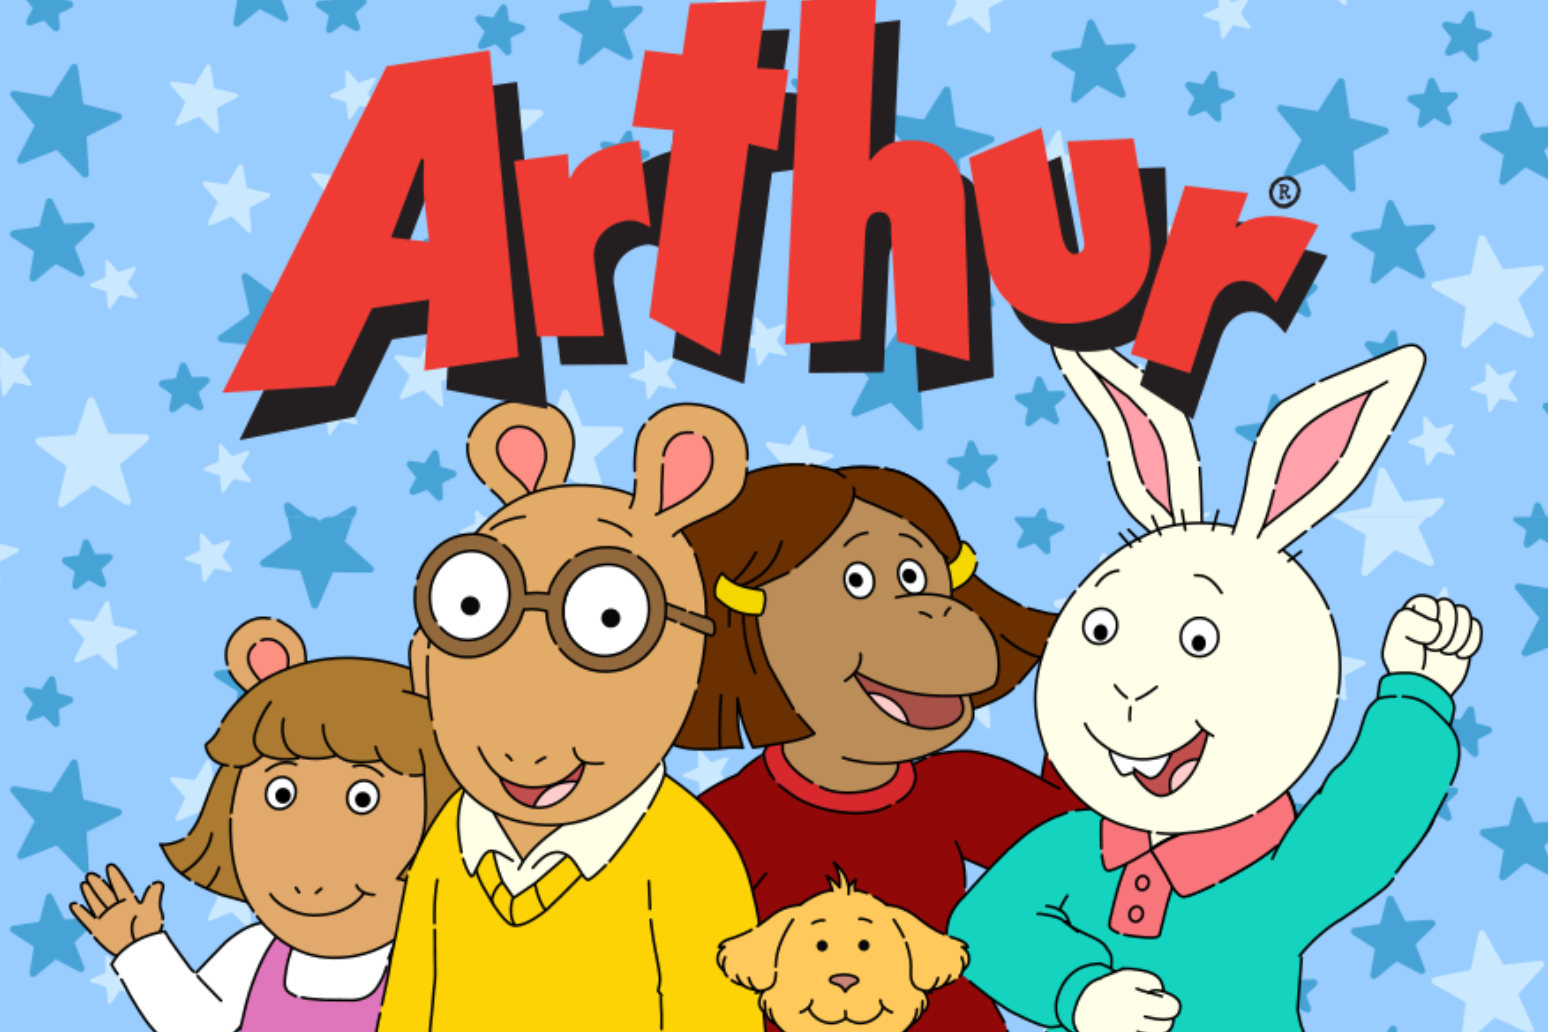 Children’s TV show Arthur to end after 25 seasons 